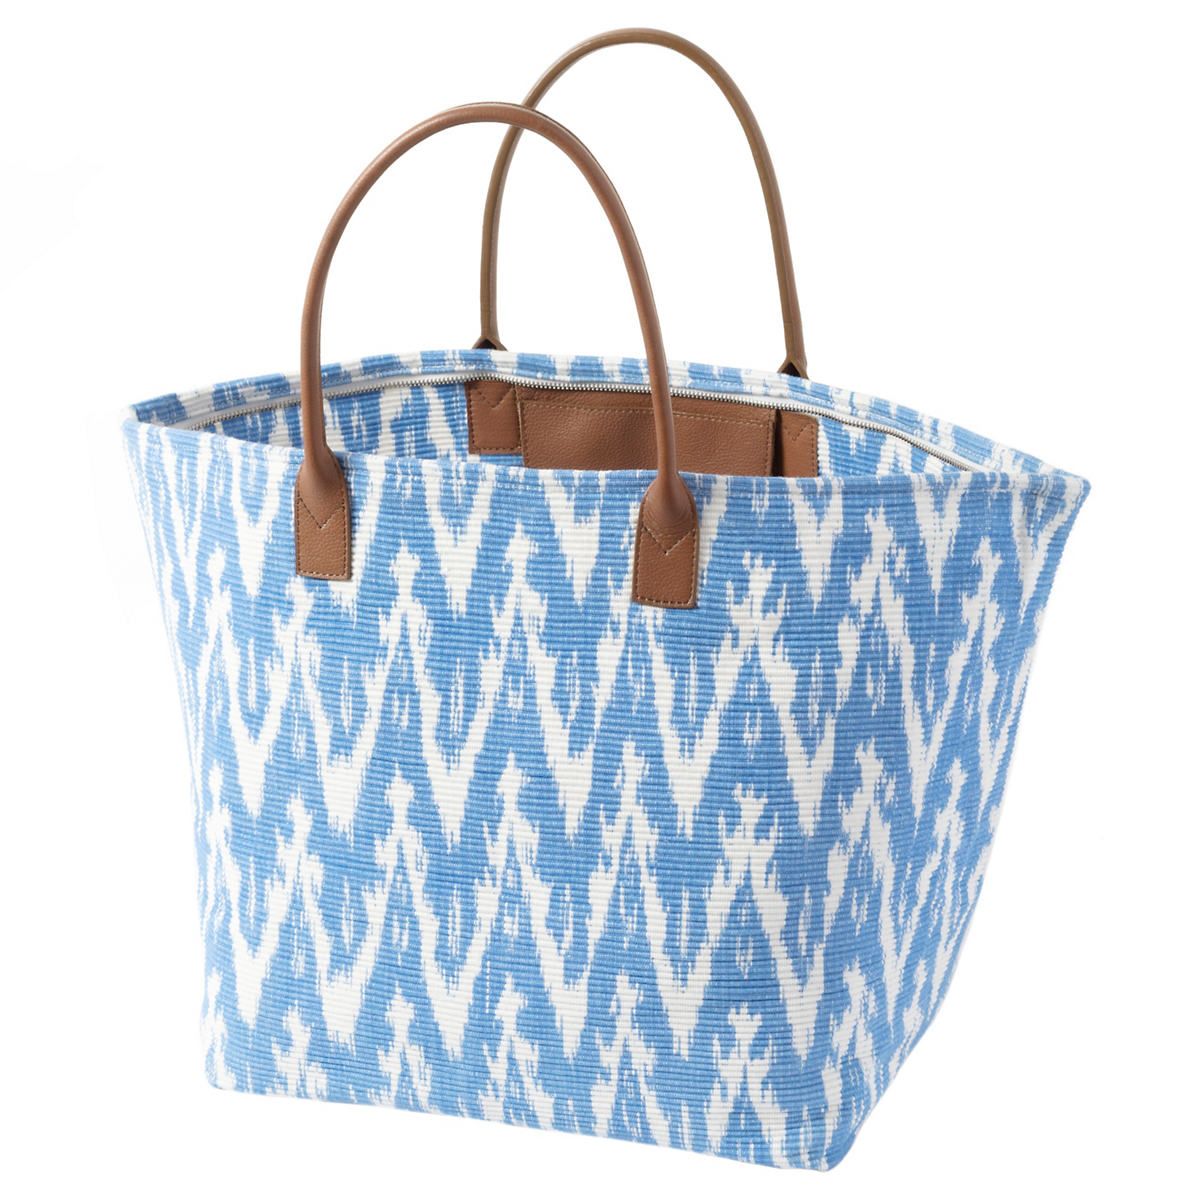 Ikat Woven French Blue Tote Bag | Annie Selke